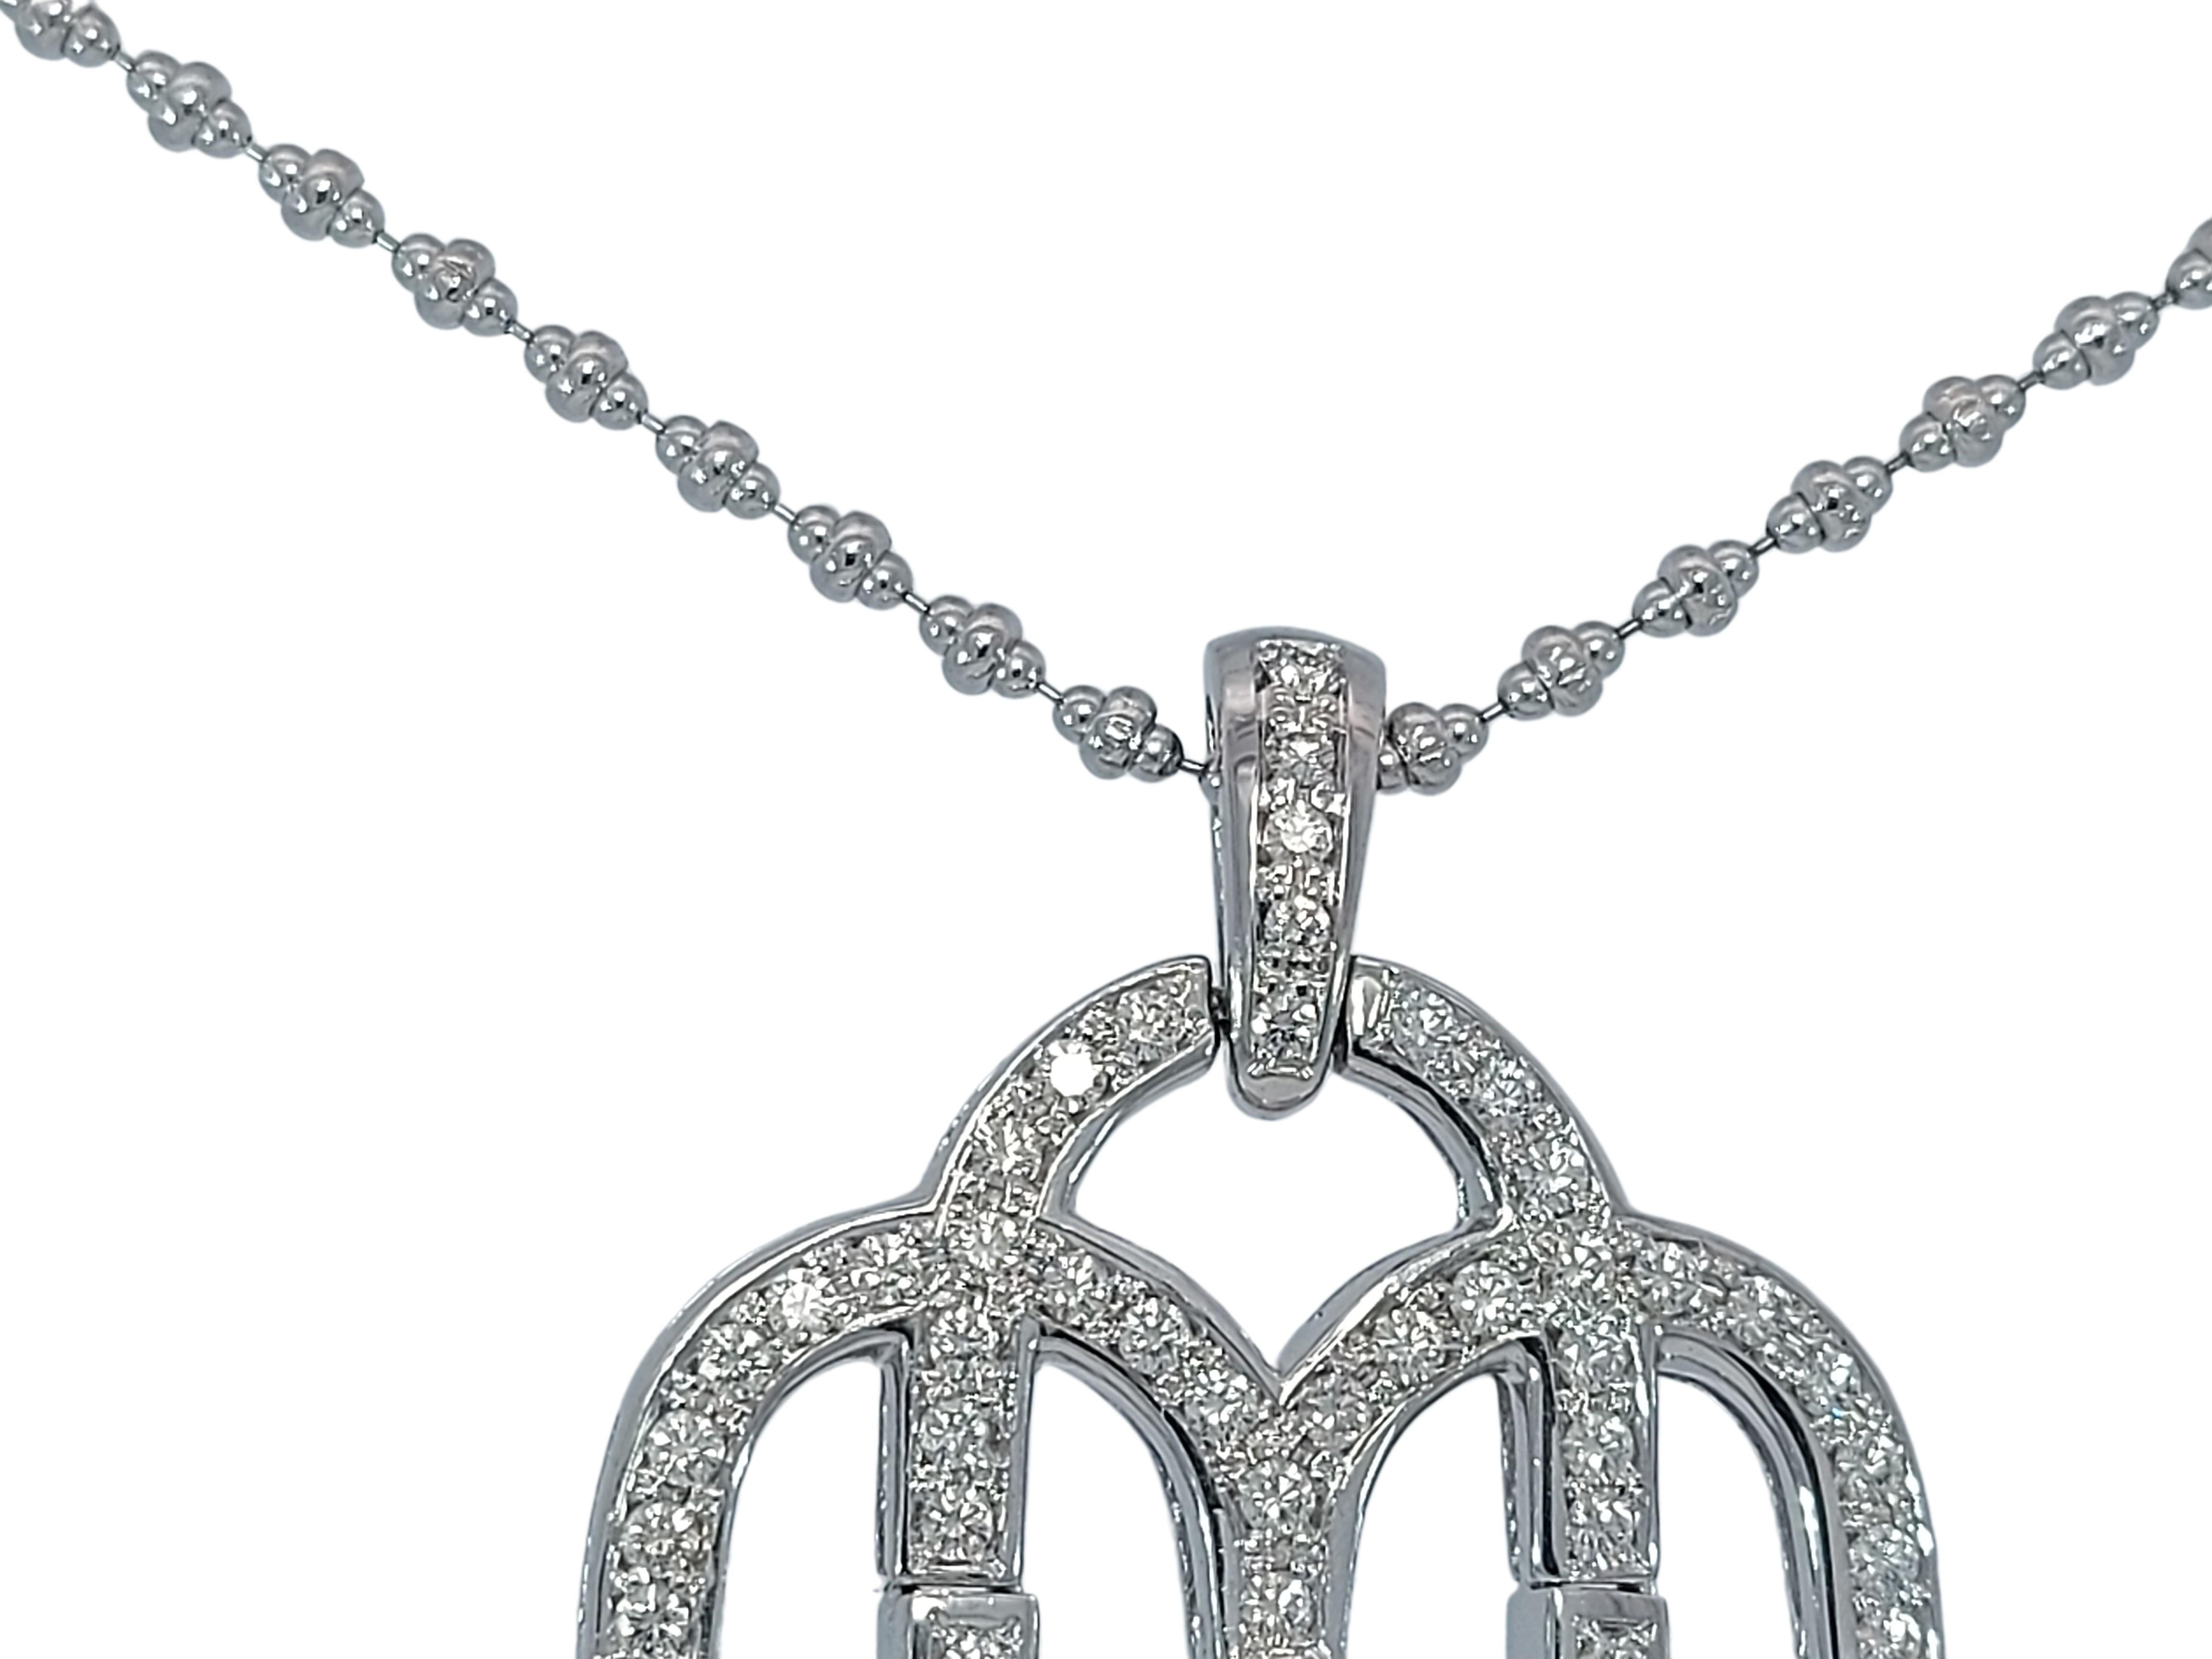 Dangling Chandelier 18kt White Gold Necklace with 5.4ct Diamonds In New Condition For Sale In Antwerp, BE